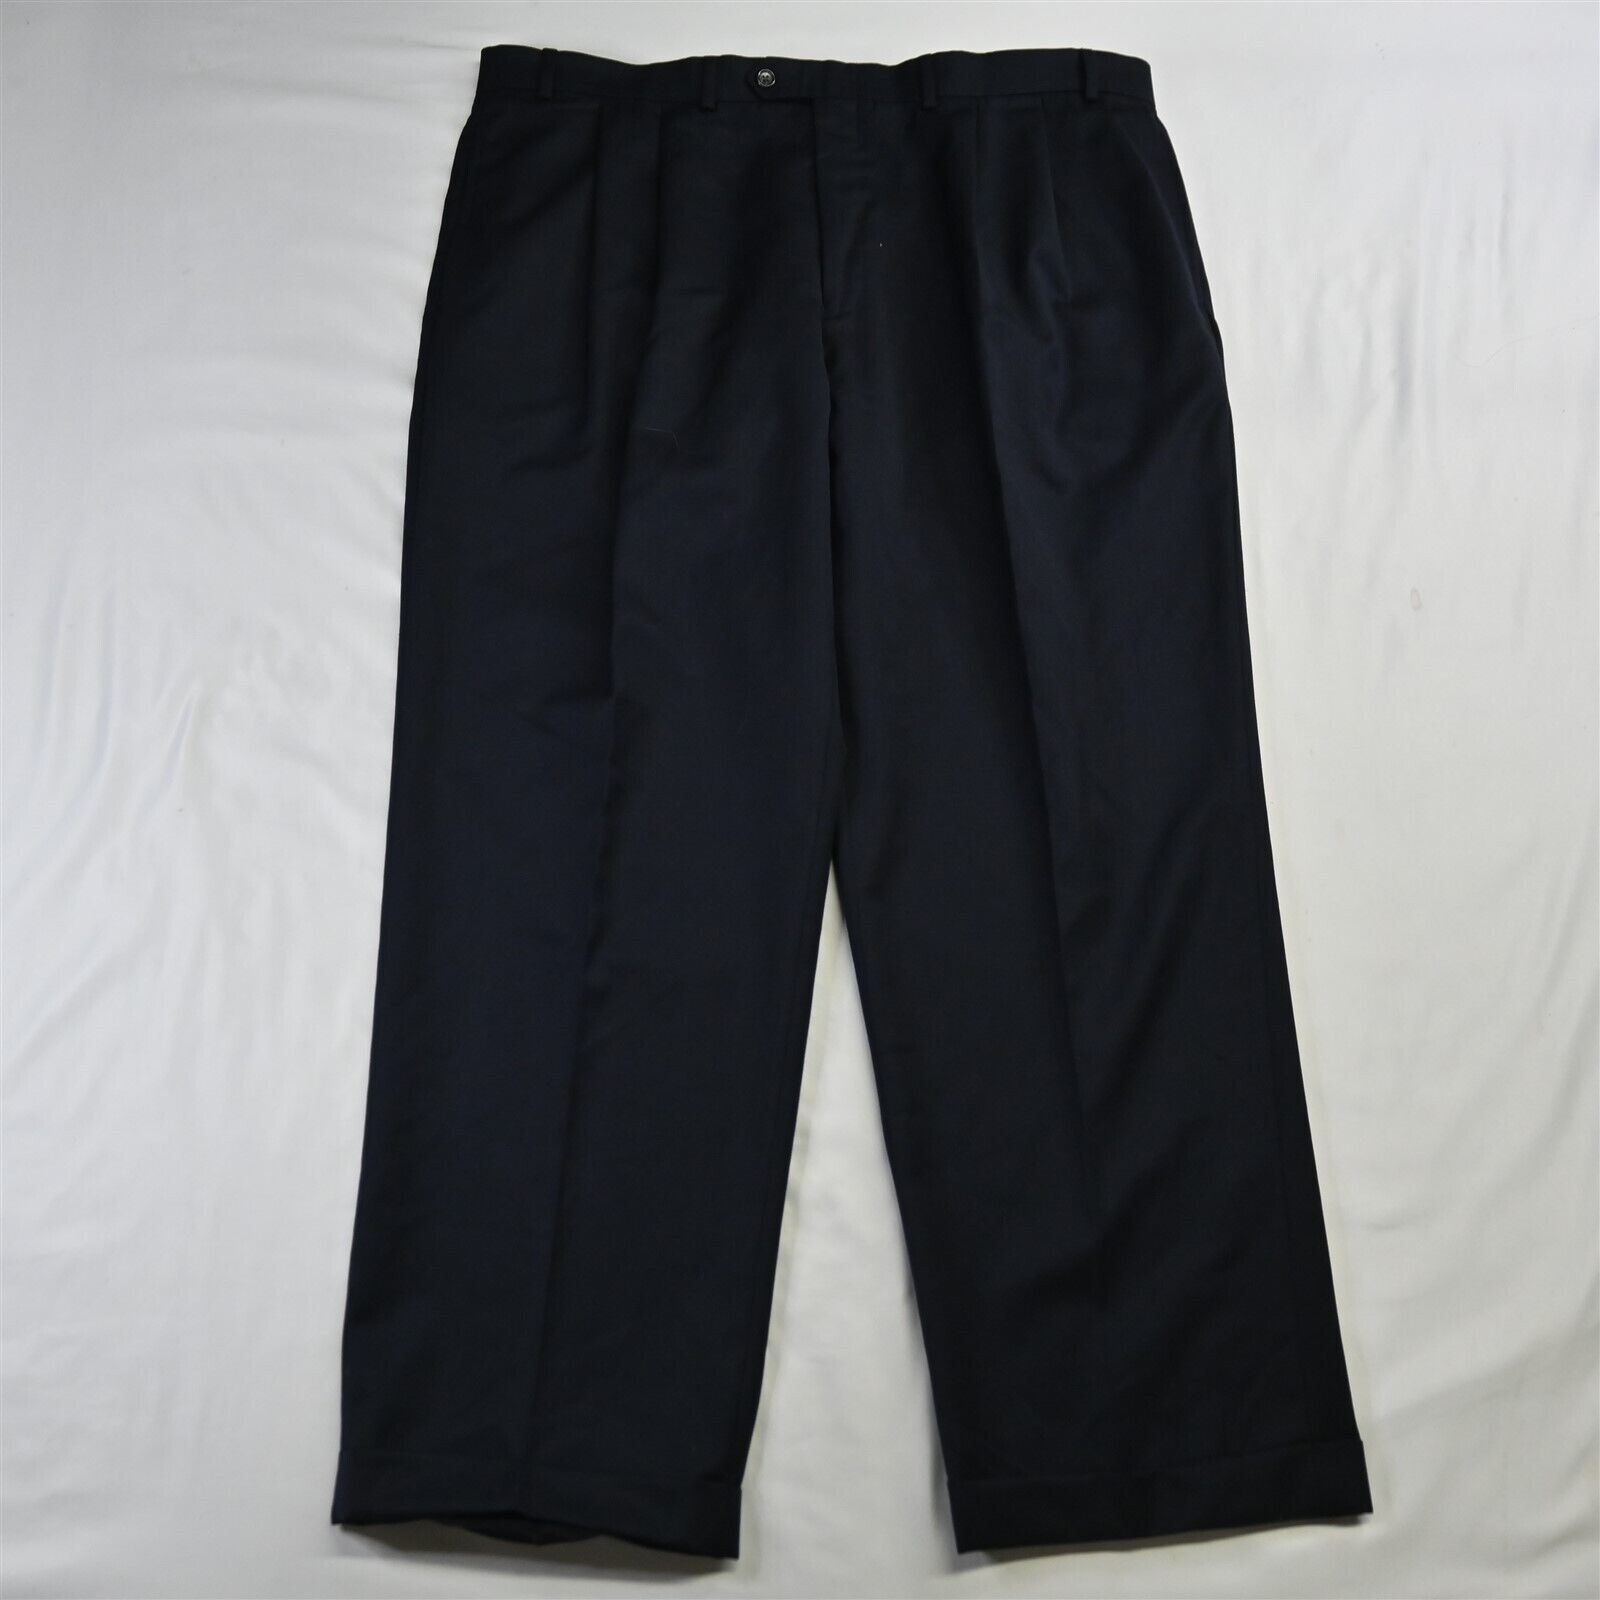 Primary image for Chaps Ralph Lauren 40 x 30 Navy Blue Comfort Stretch Pleated Mens Dress Pants